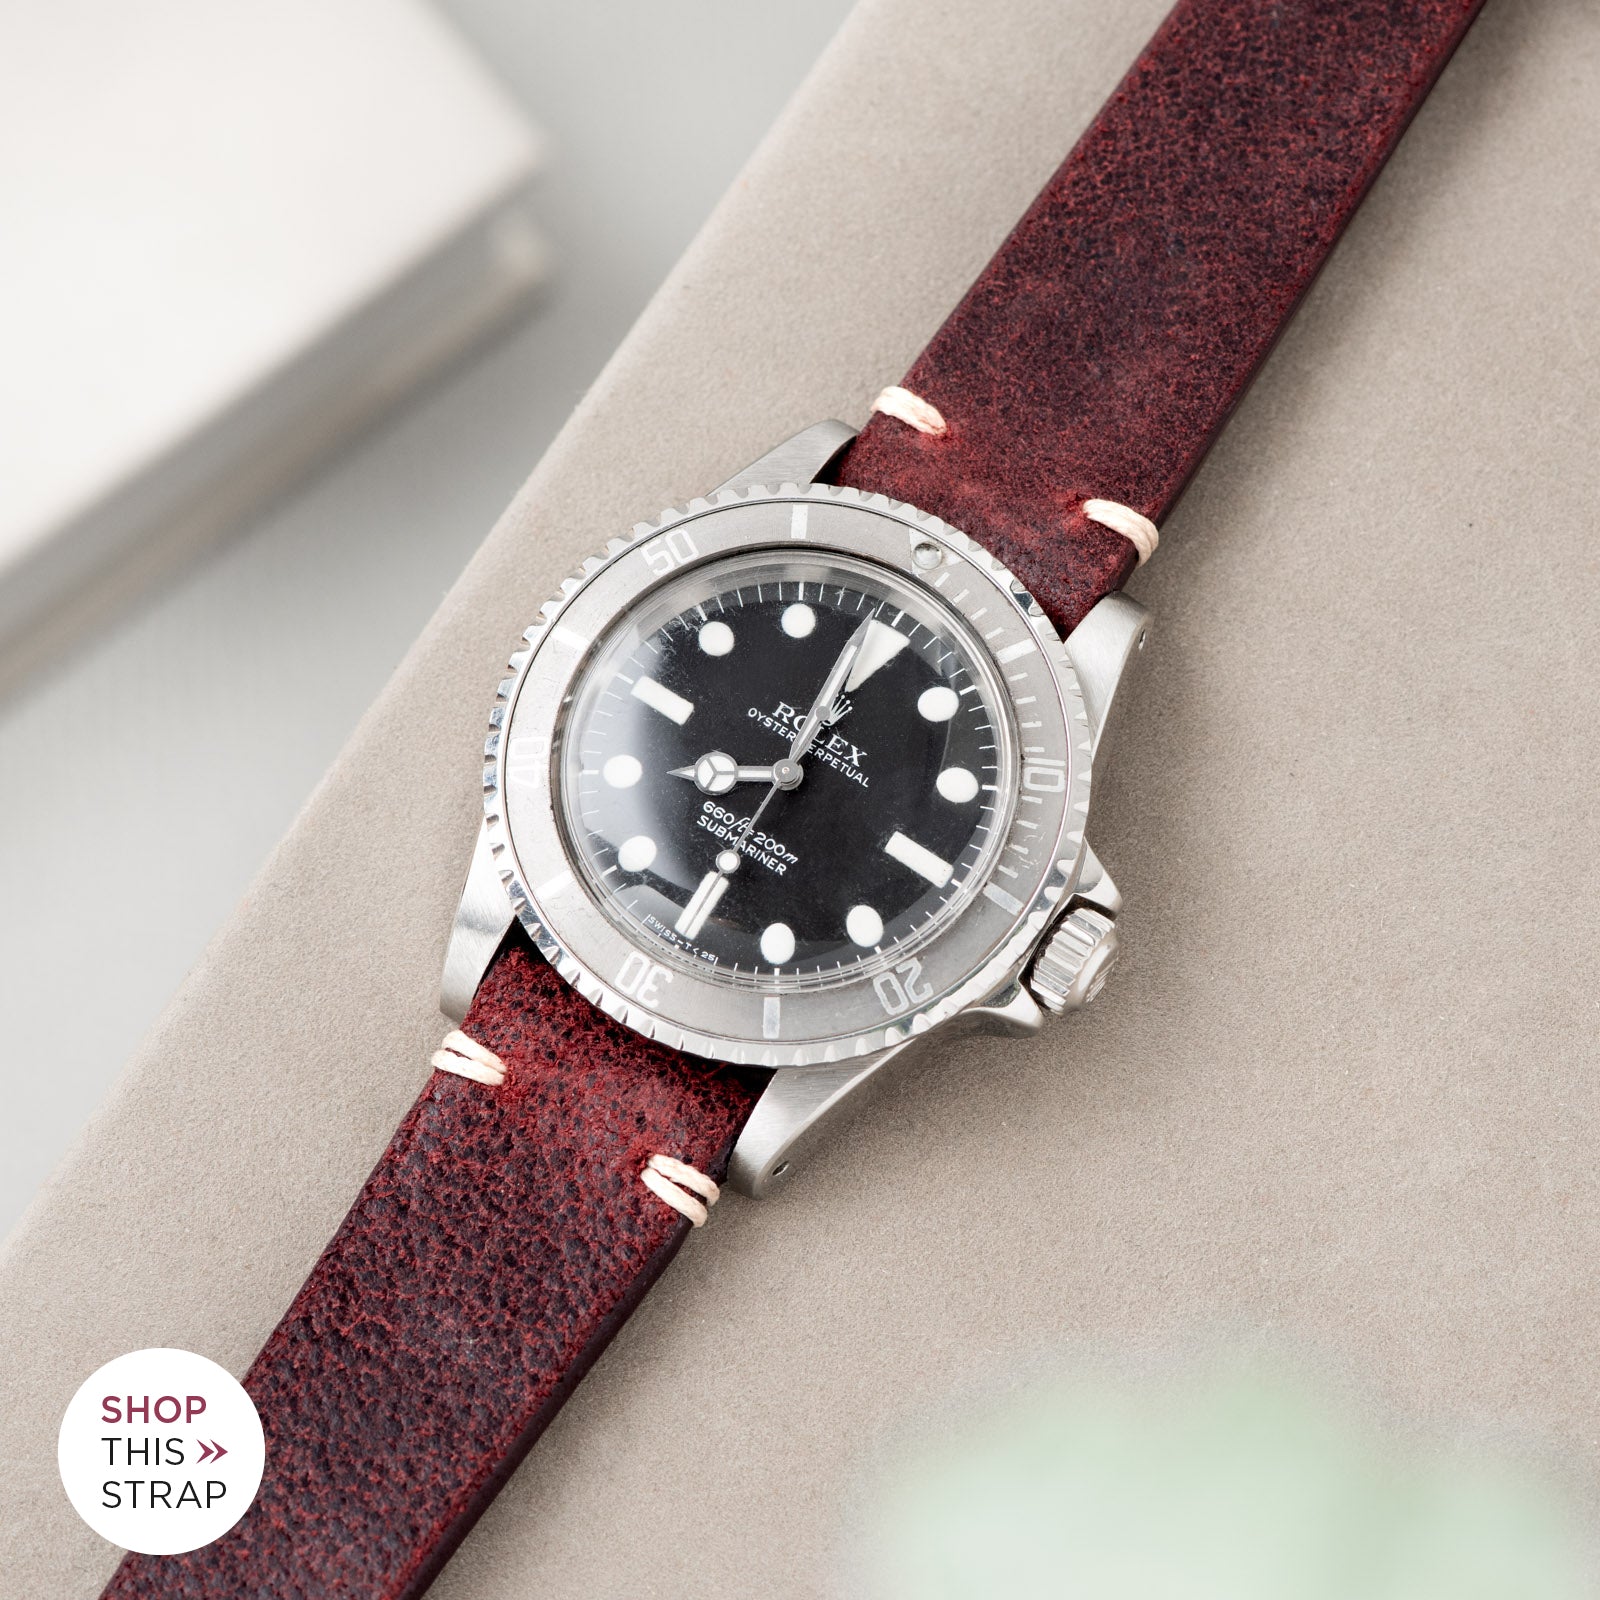 Bulang and Sons_Strap Guide_The Rolex 5513 Faded Maxi Submariner_Crackle Burgundy Red Leather Watch Strap